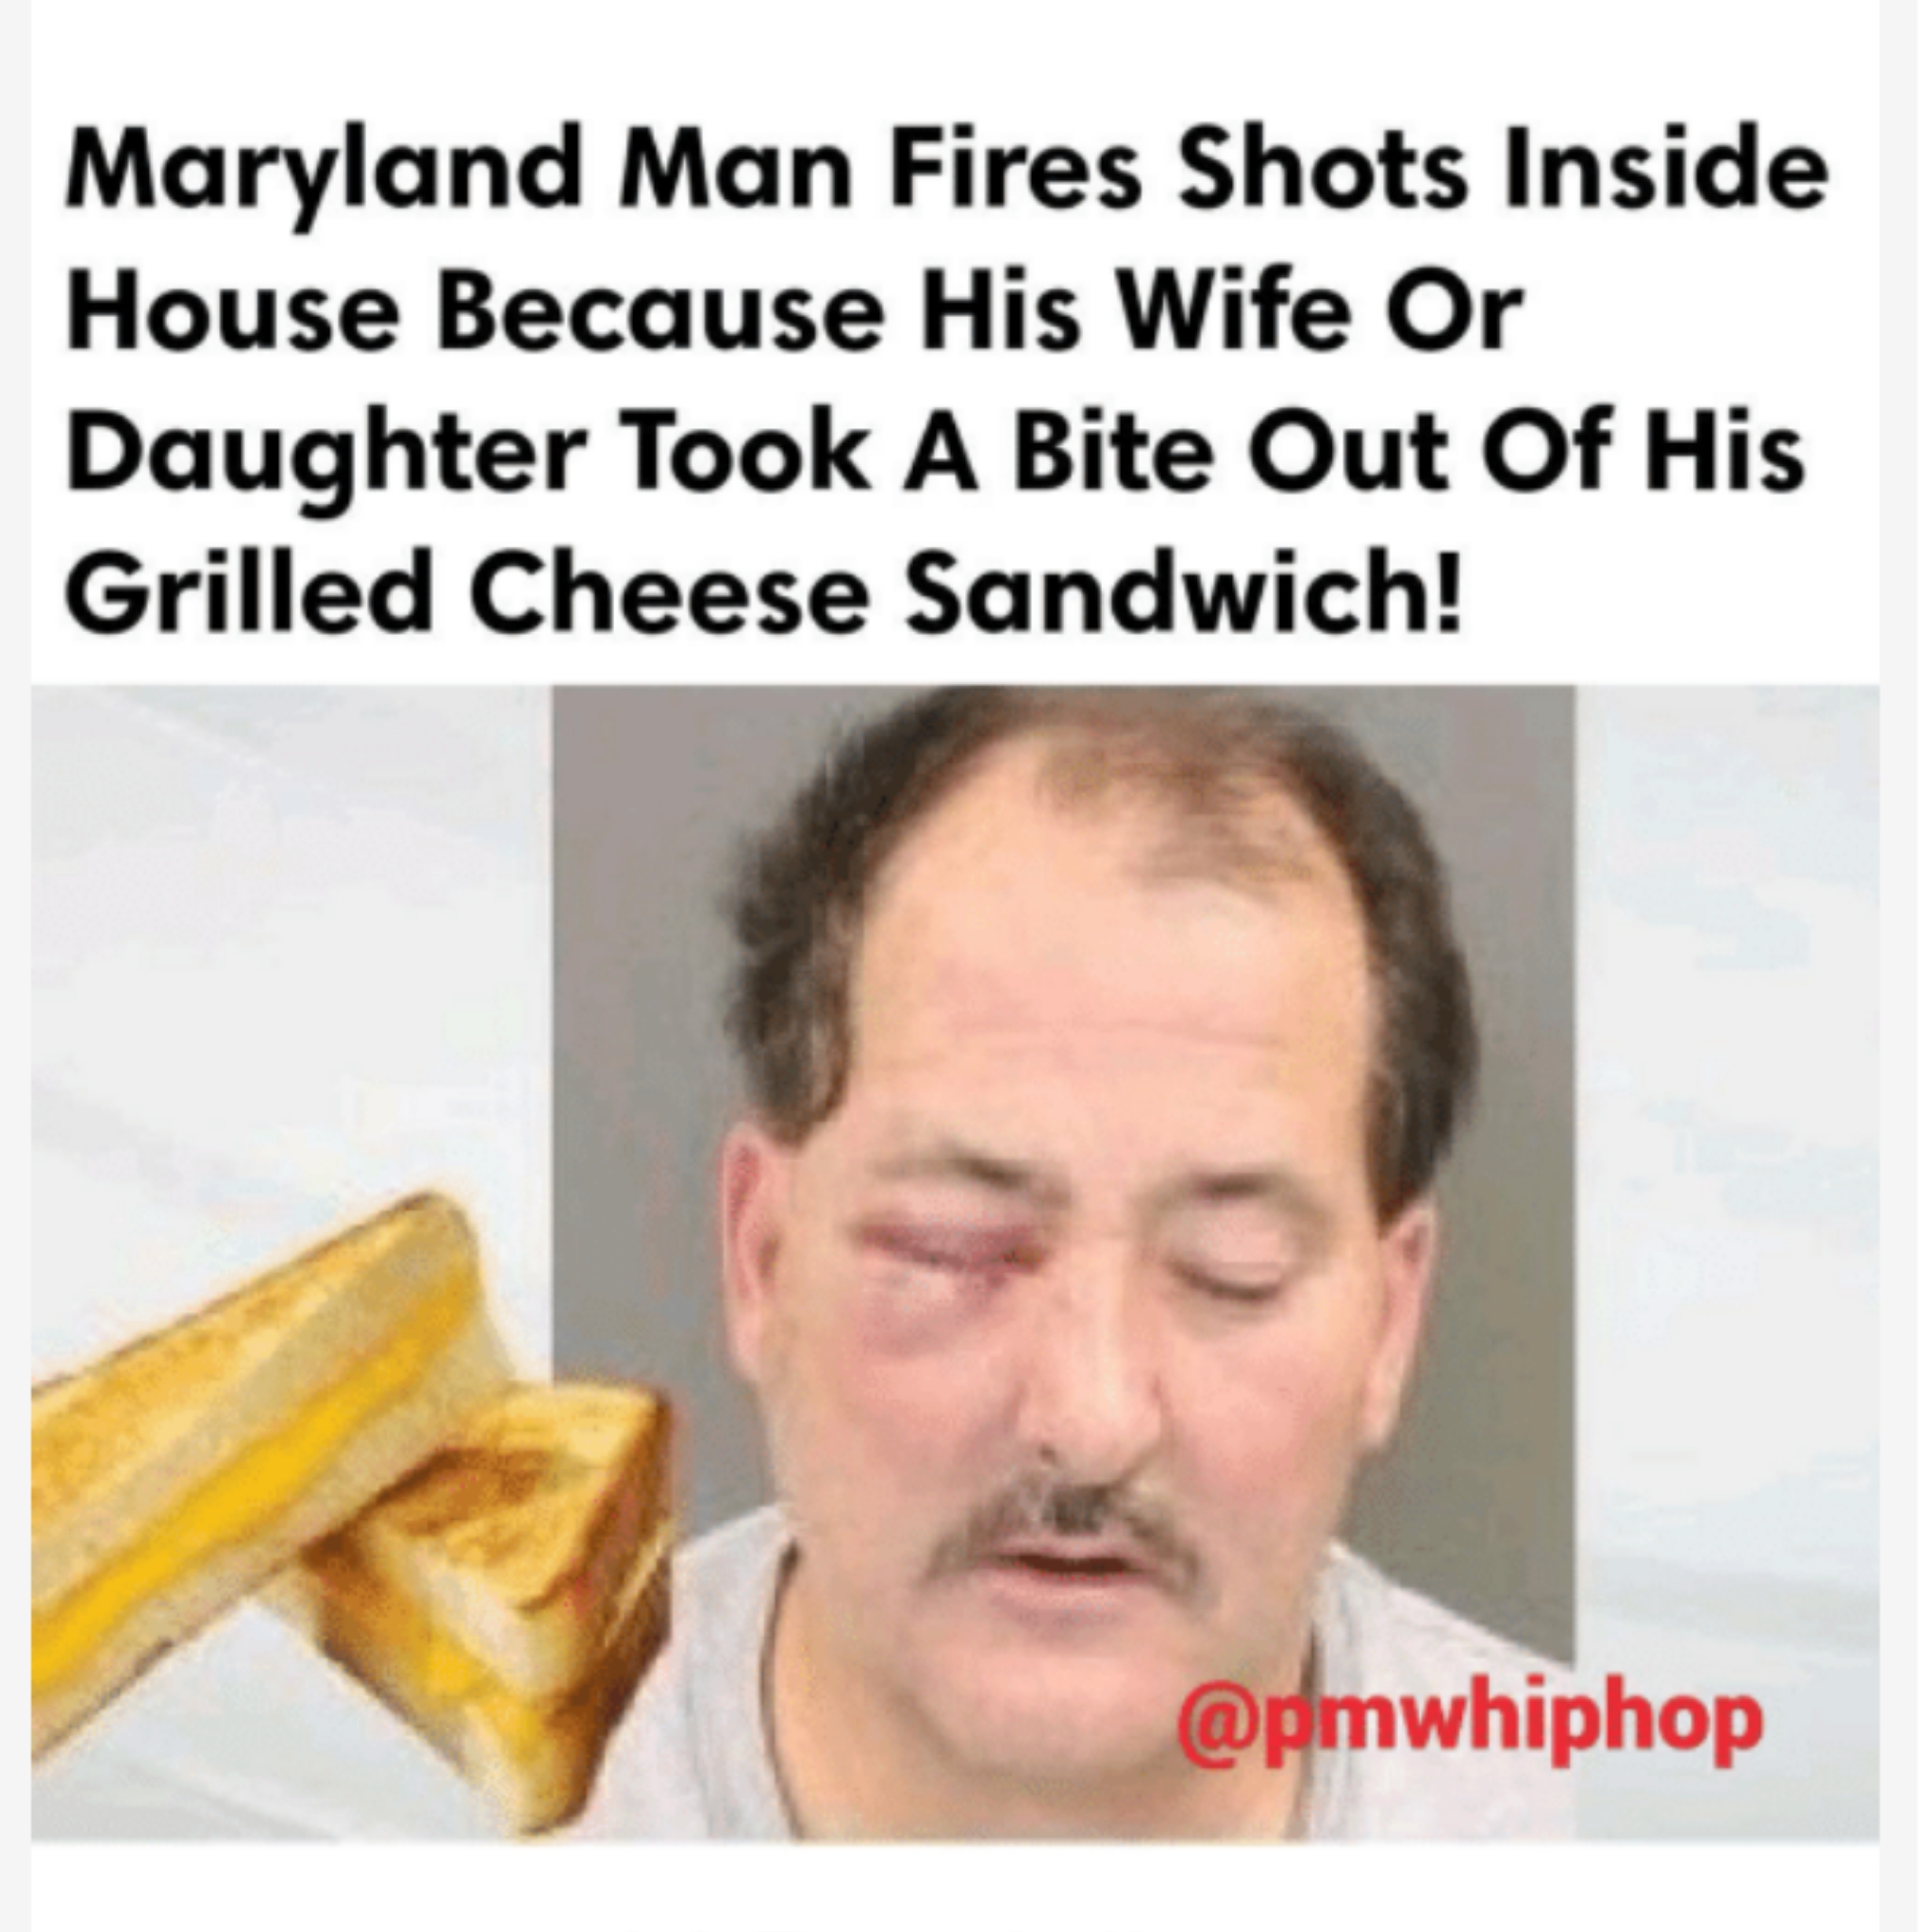 maryland man meme - Maryland Man Fires Shots Inside House Because His Wife Or Daughter Took A Bite Out Of His Grilled Cheese Sandwich!